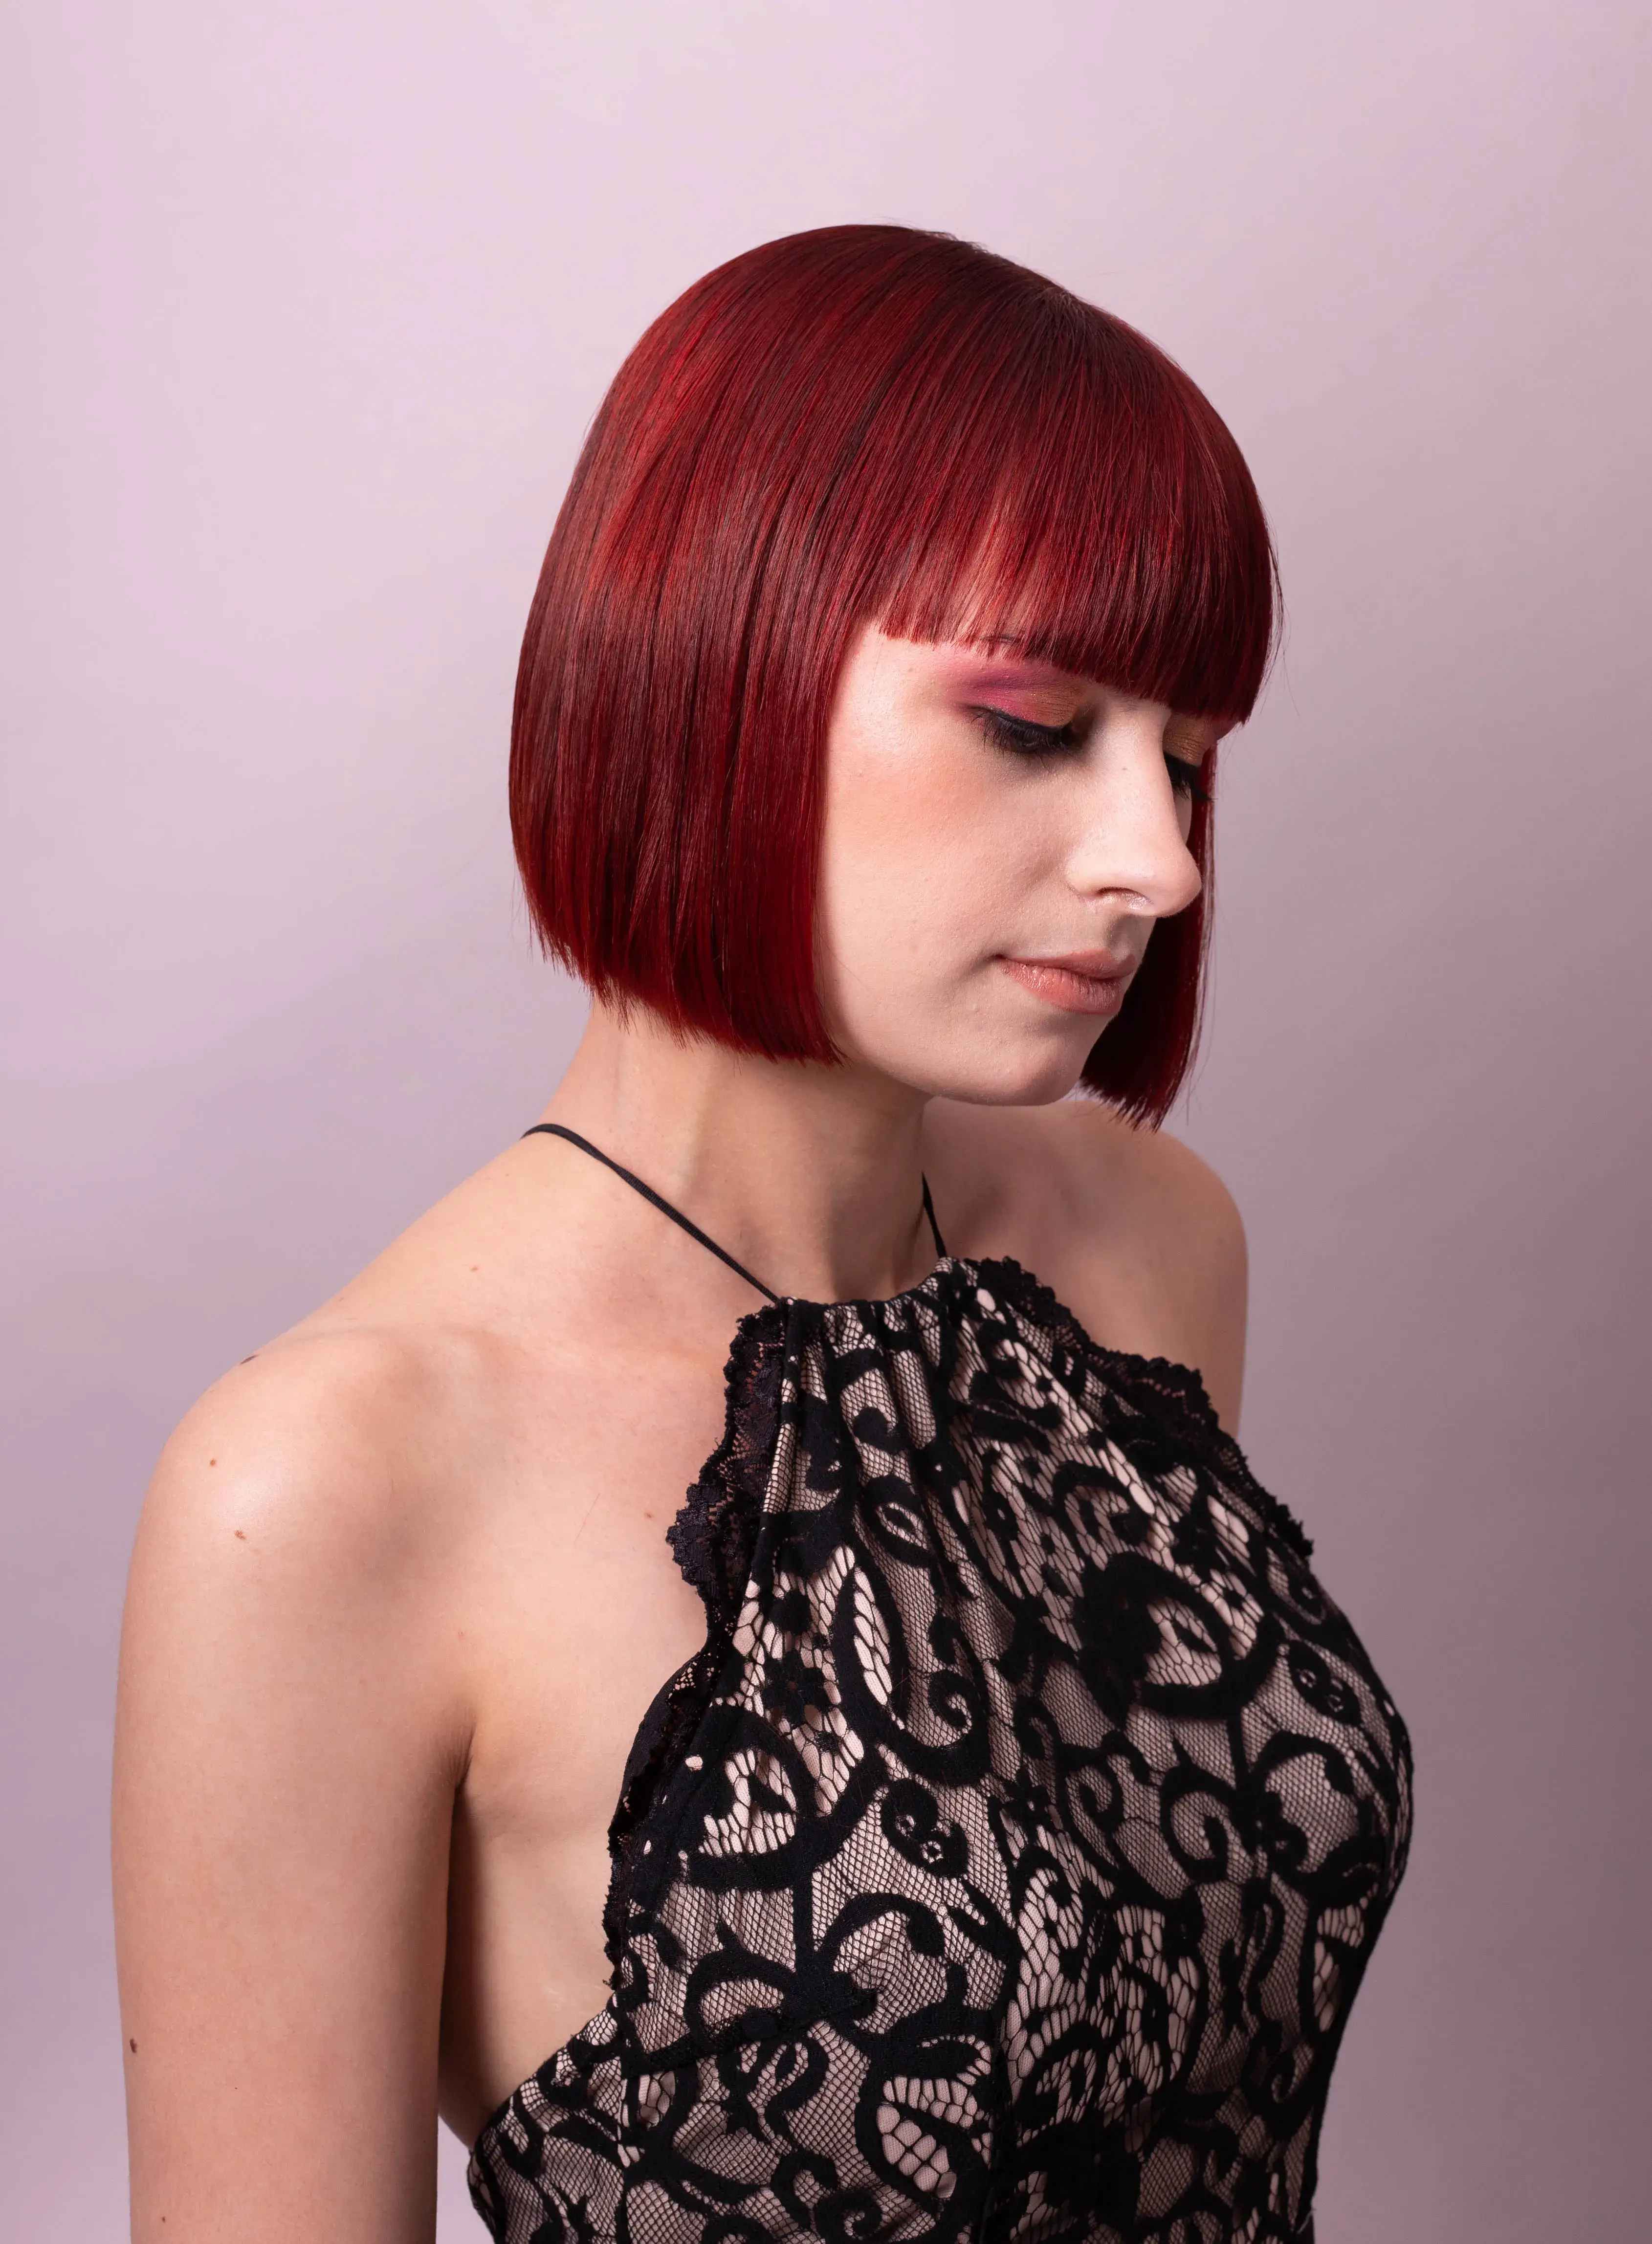 Woman with red bob cut with a full fringe looking down